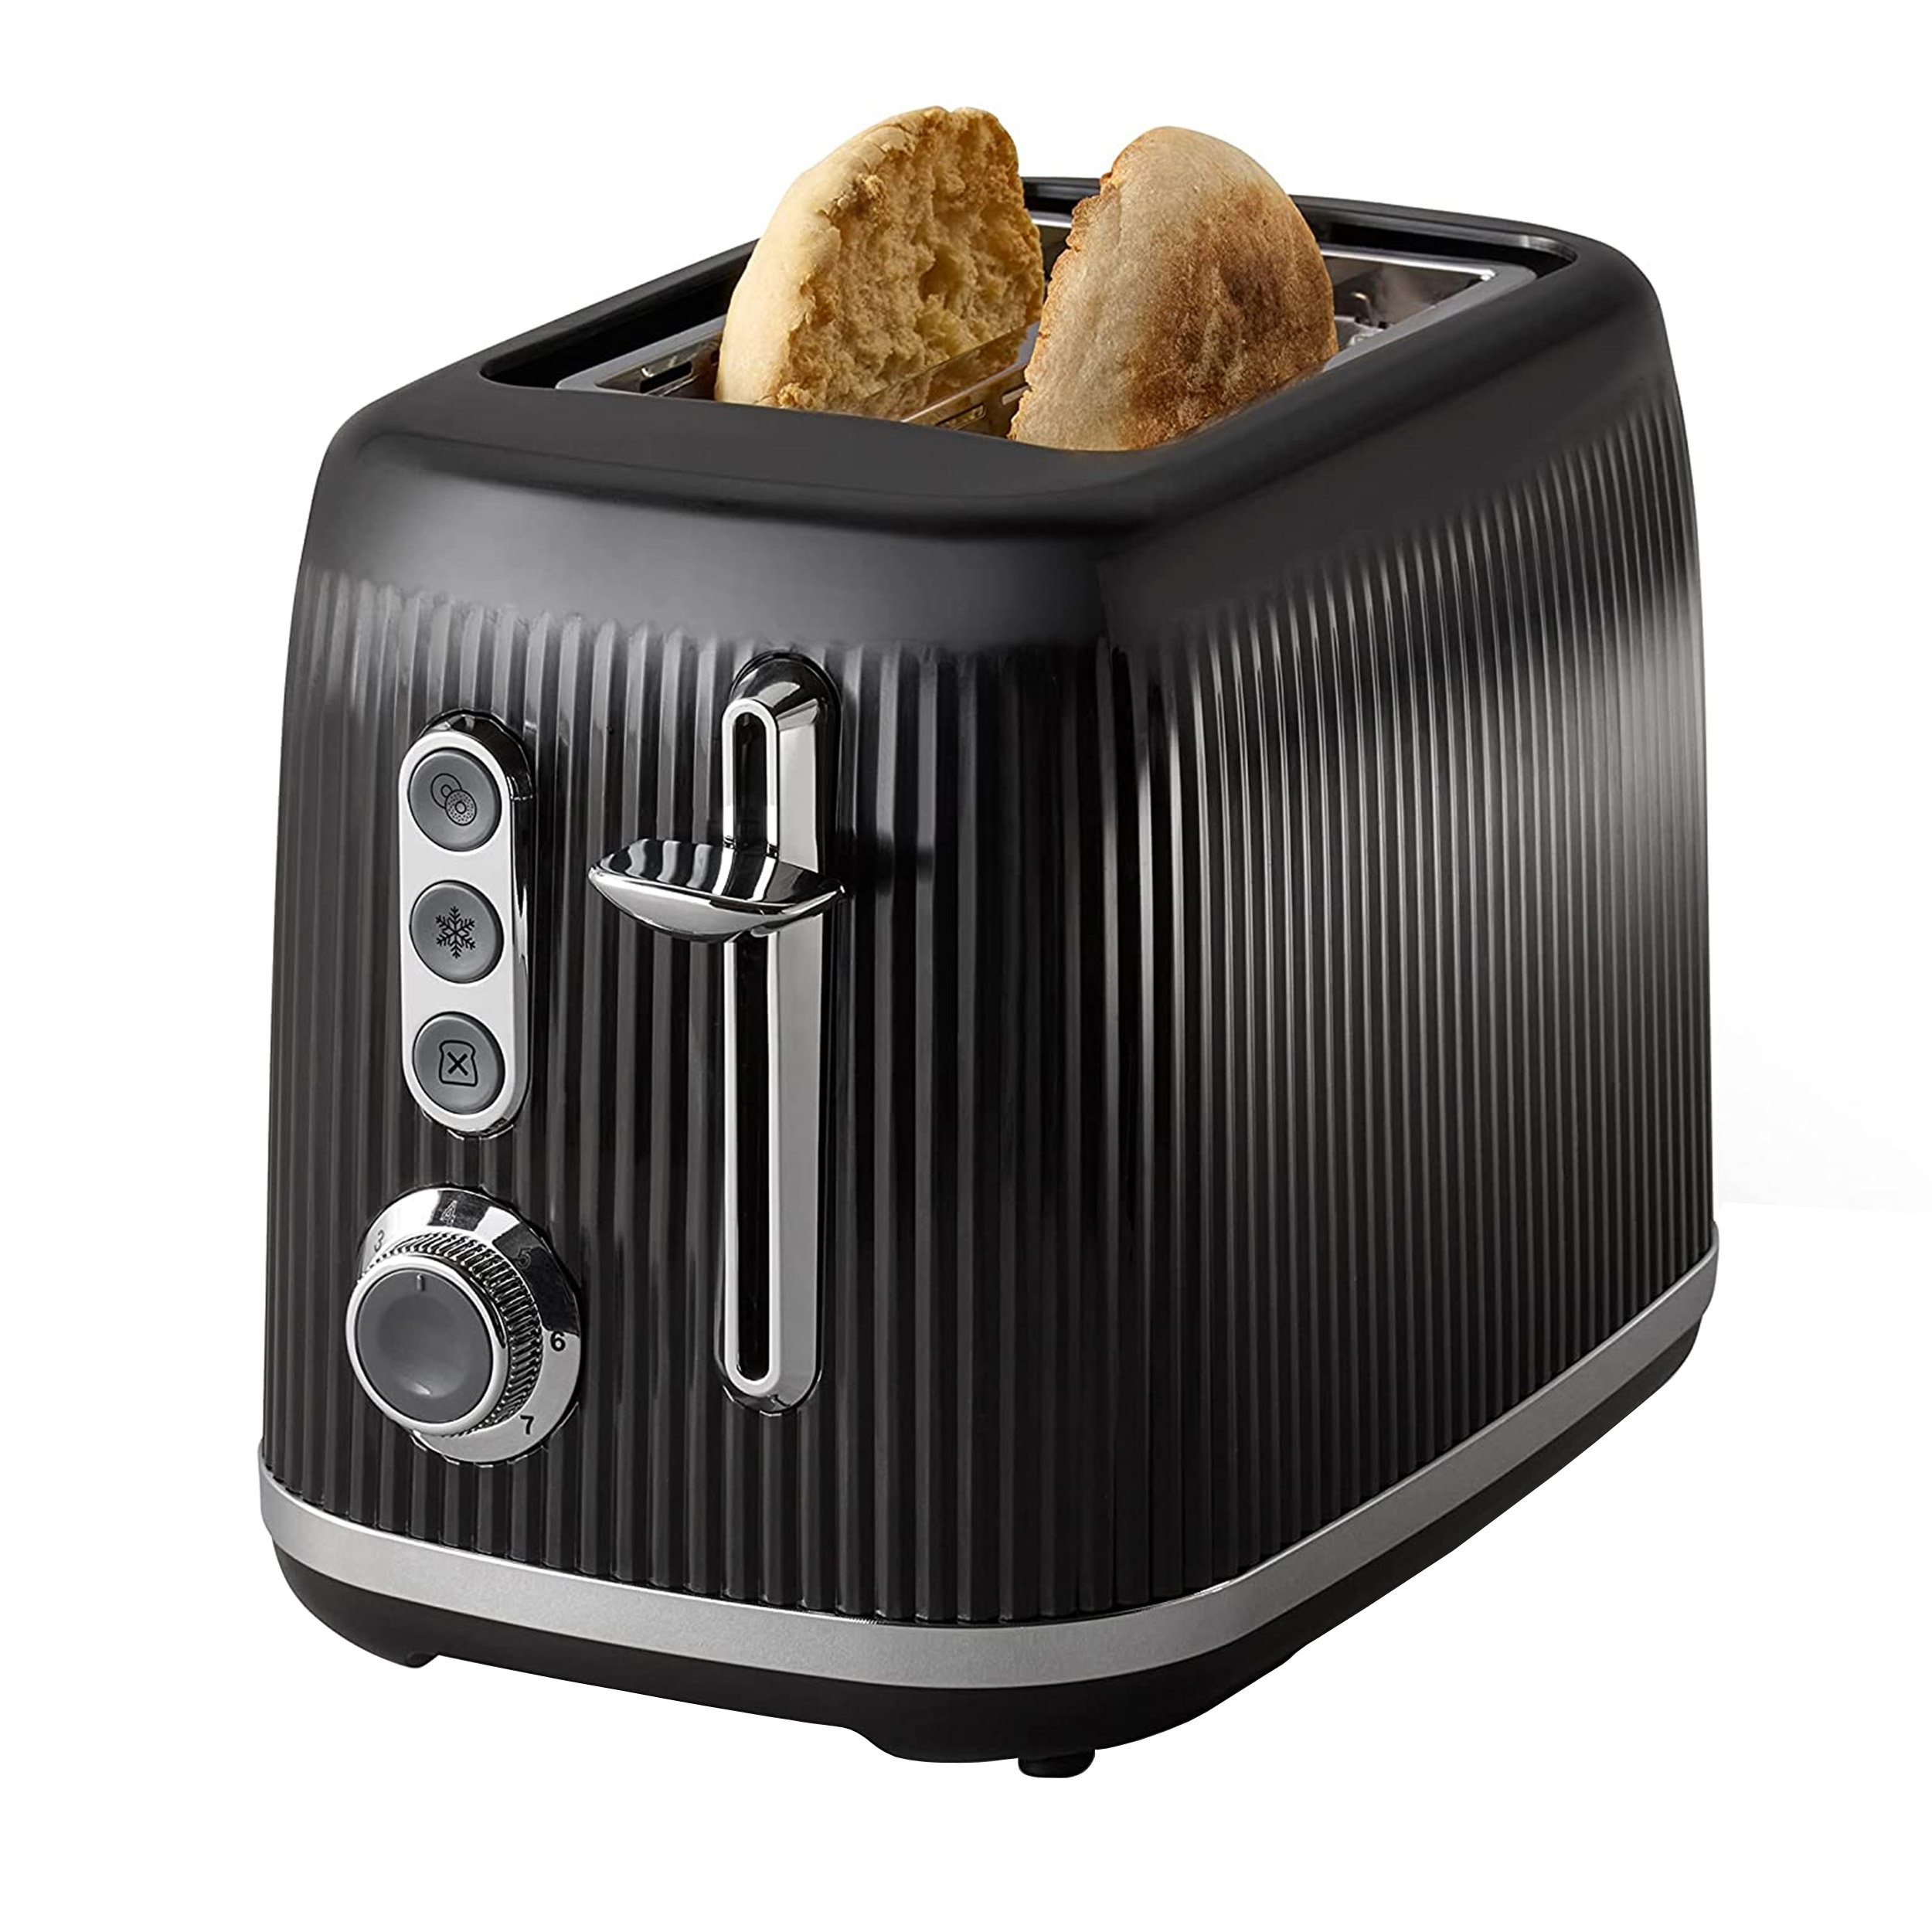 Oster 2-Slice Toaster with Advanced Toast Technology, Stainless Steel